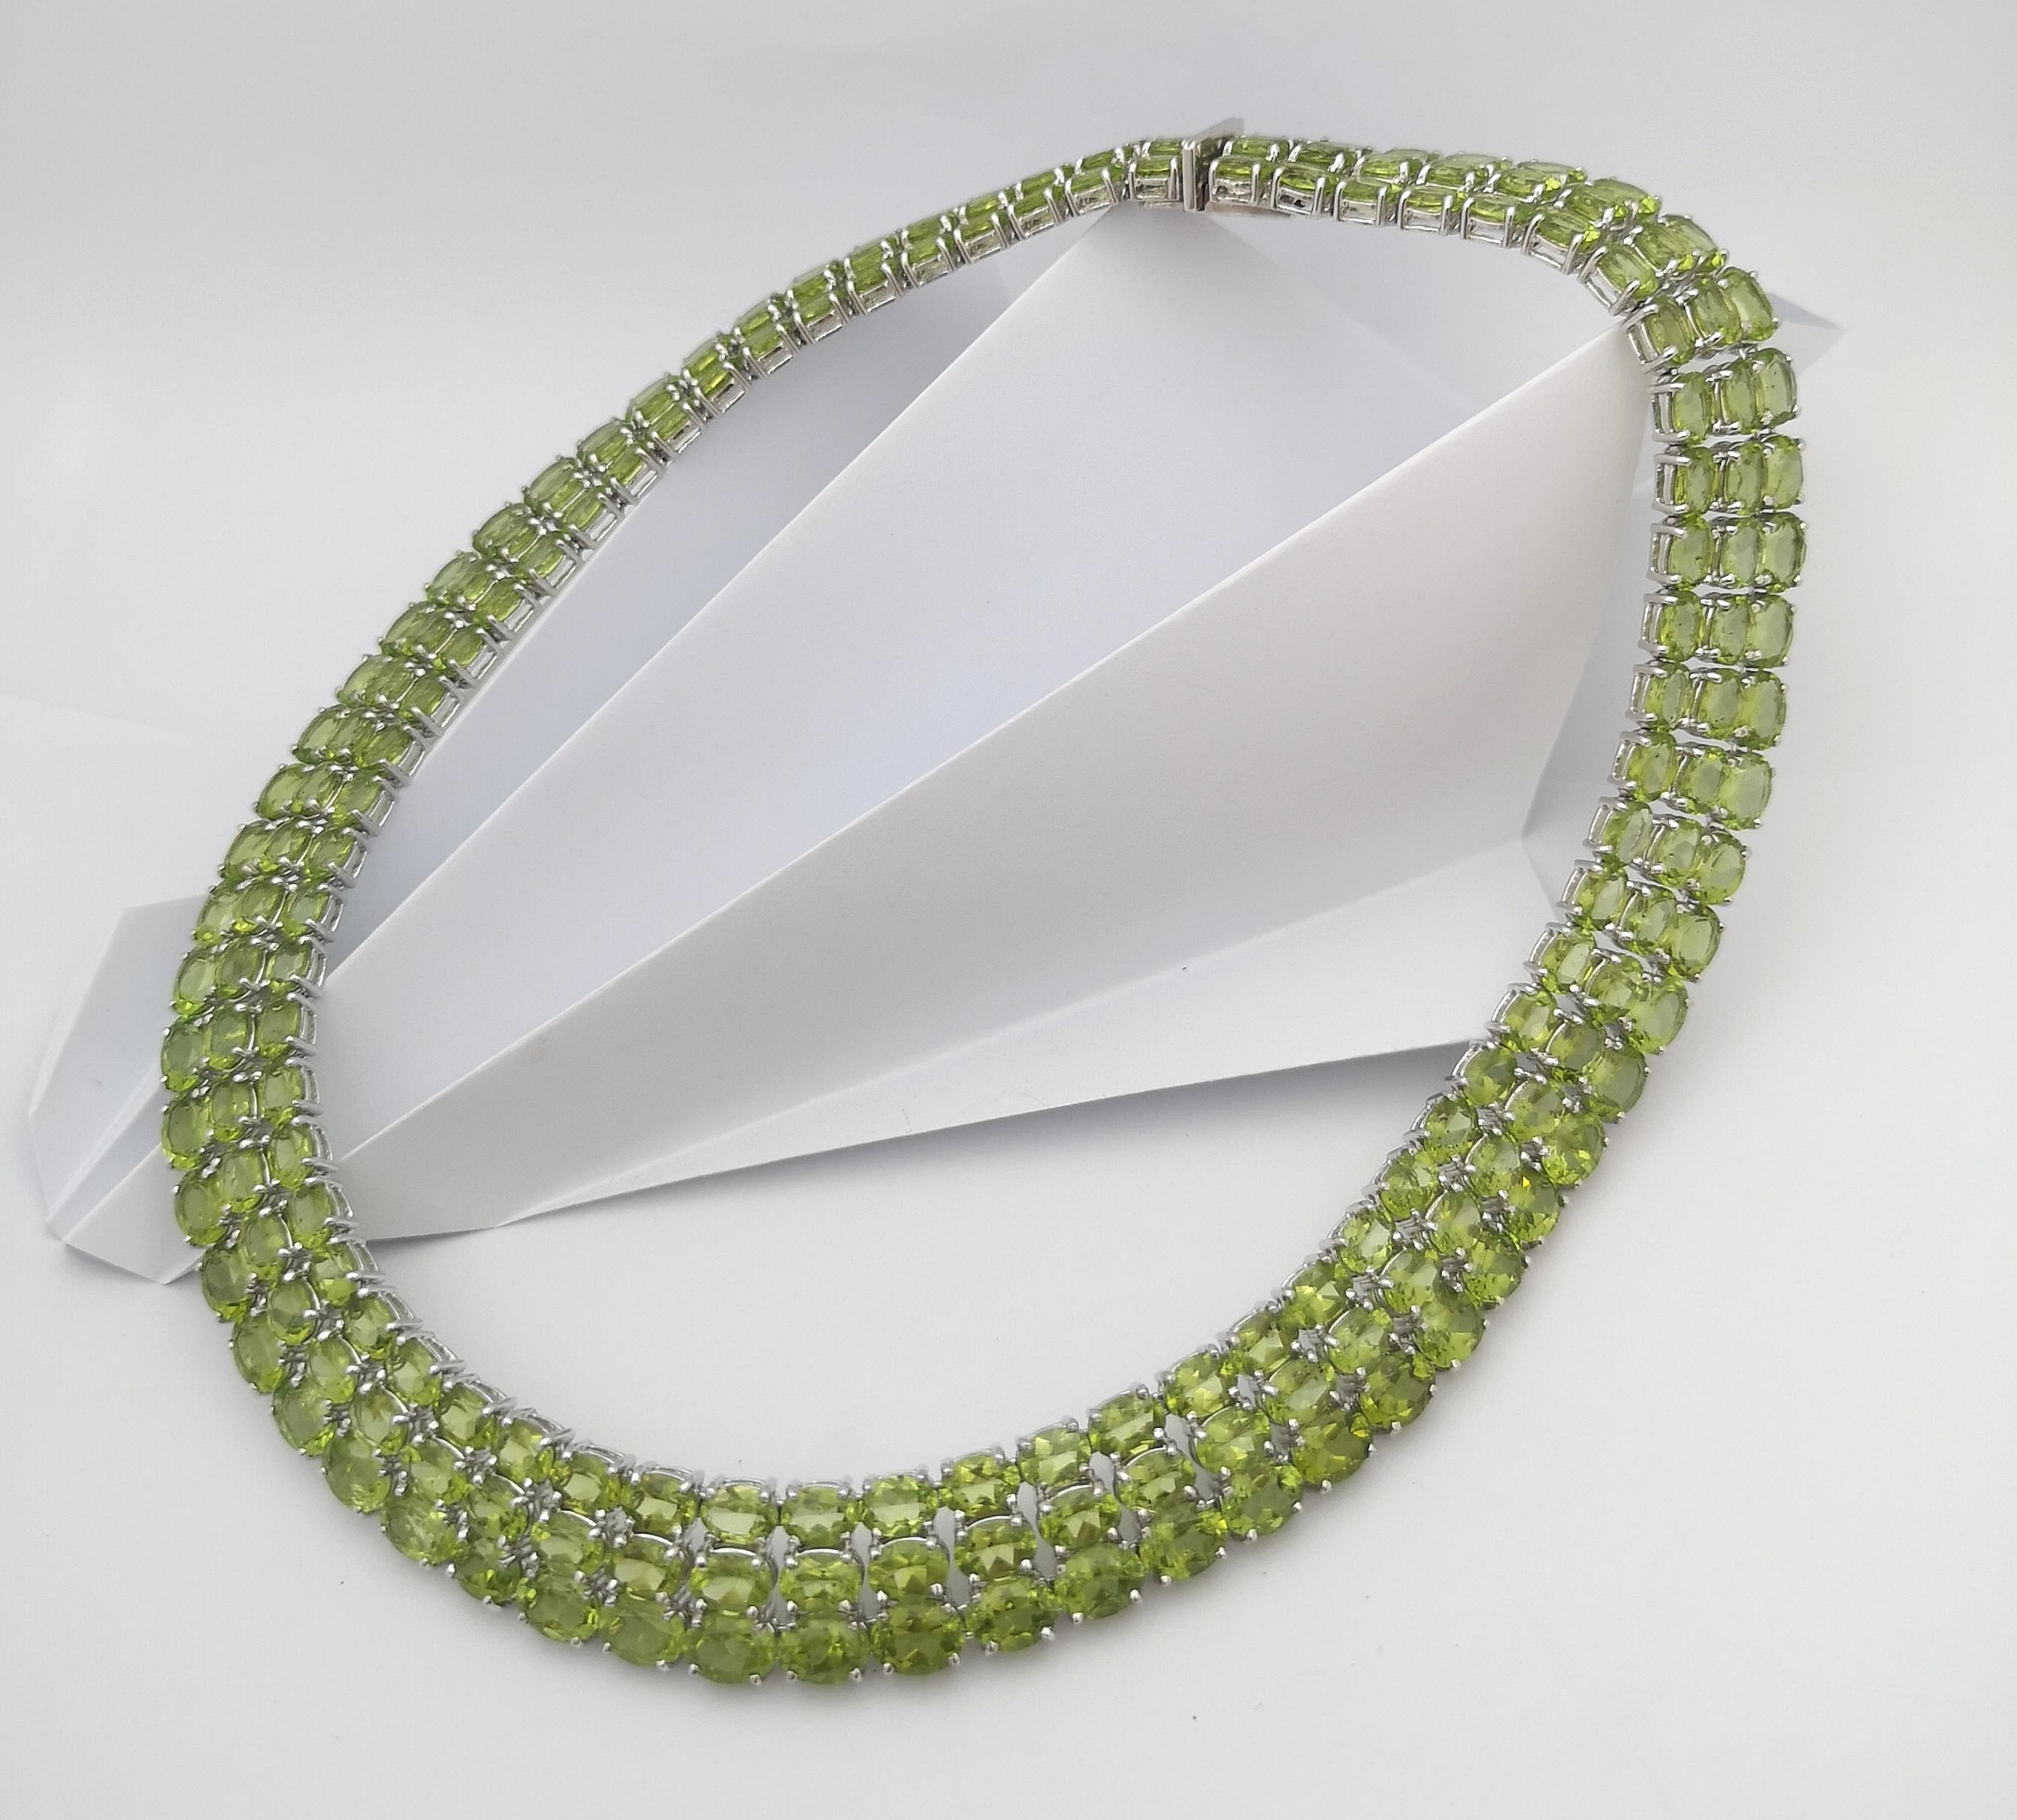 Oval Cut Peridot 175.10 carats Necklace set in Silver Settings For Sale